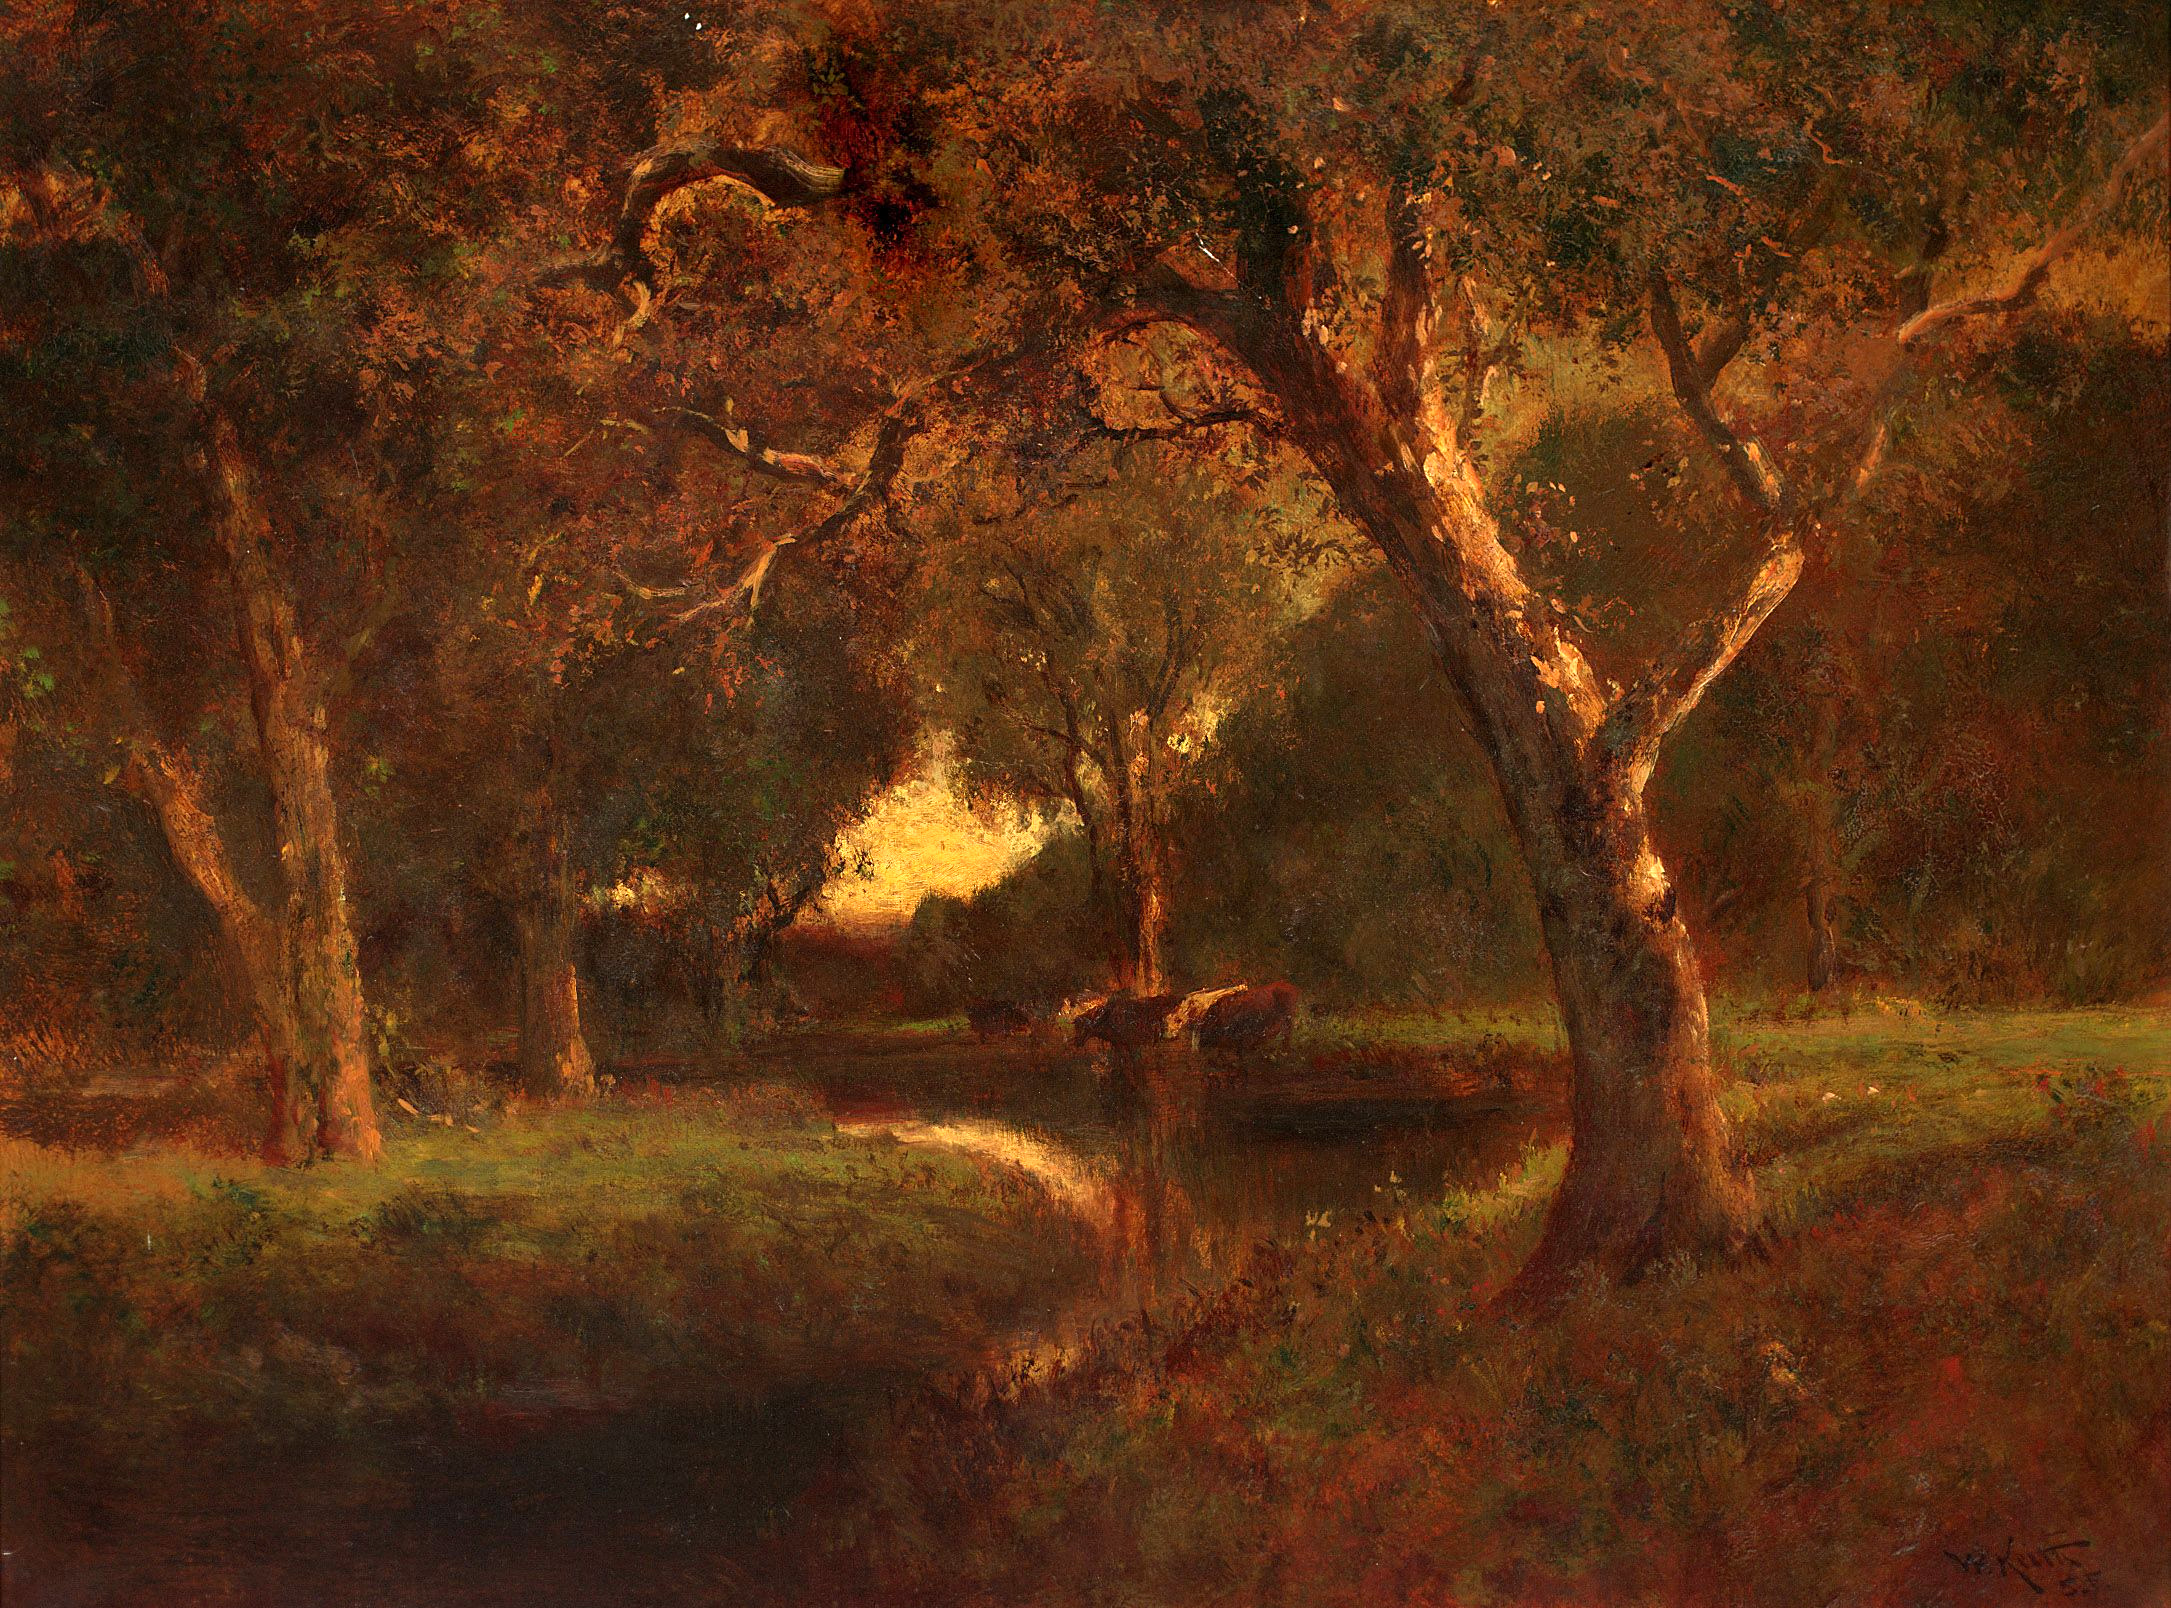 River at Evening by William Keith